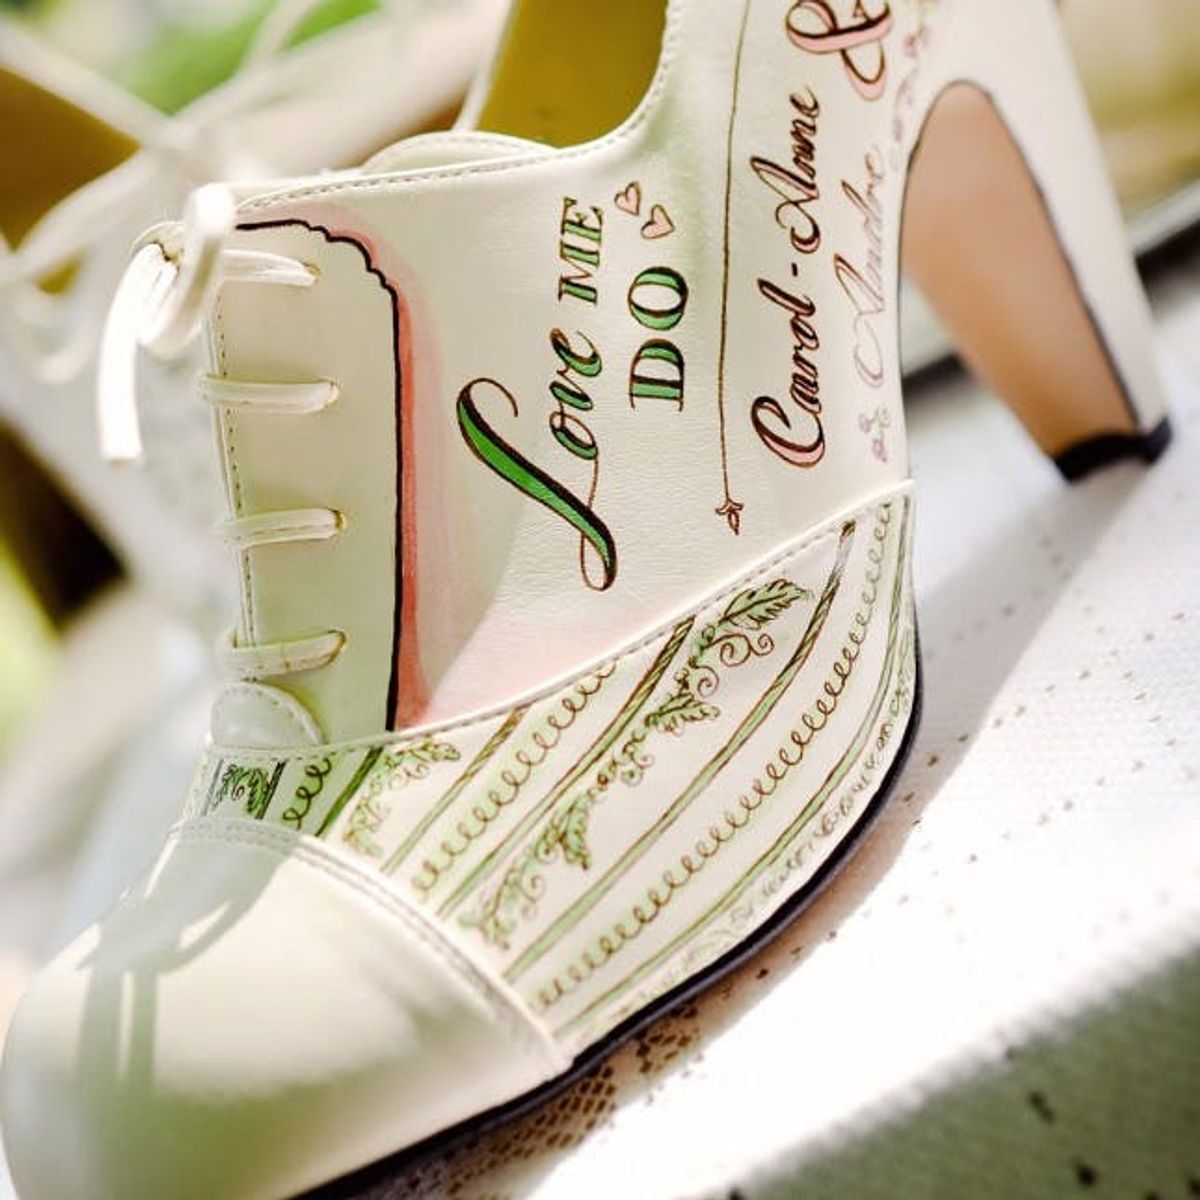 You’ve Never Seen Wedding Shoes like These Before